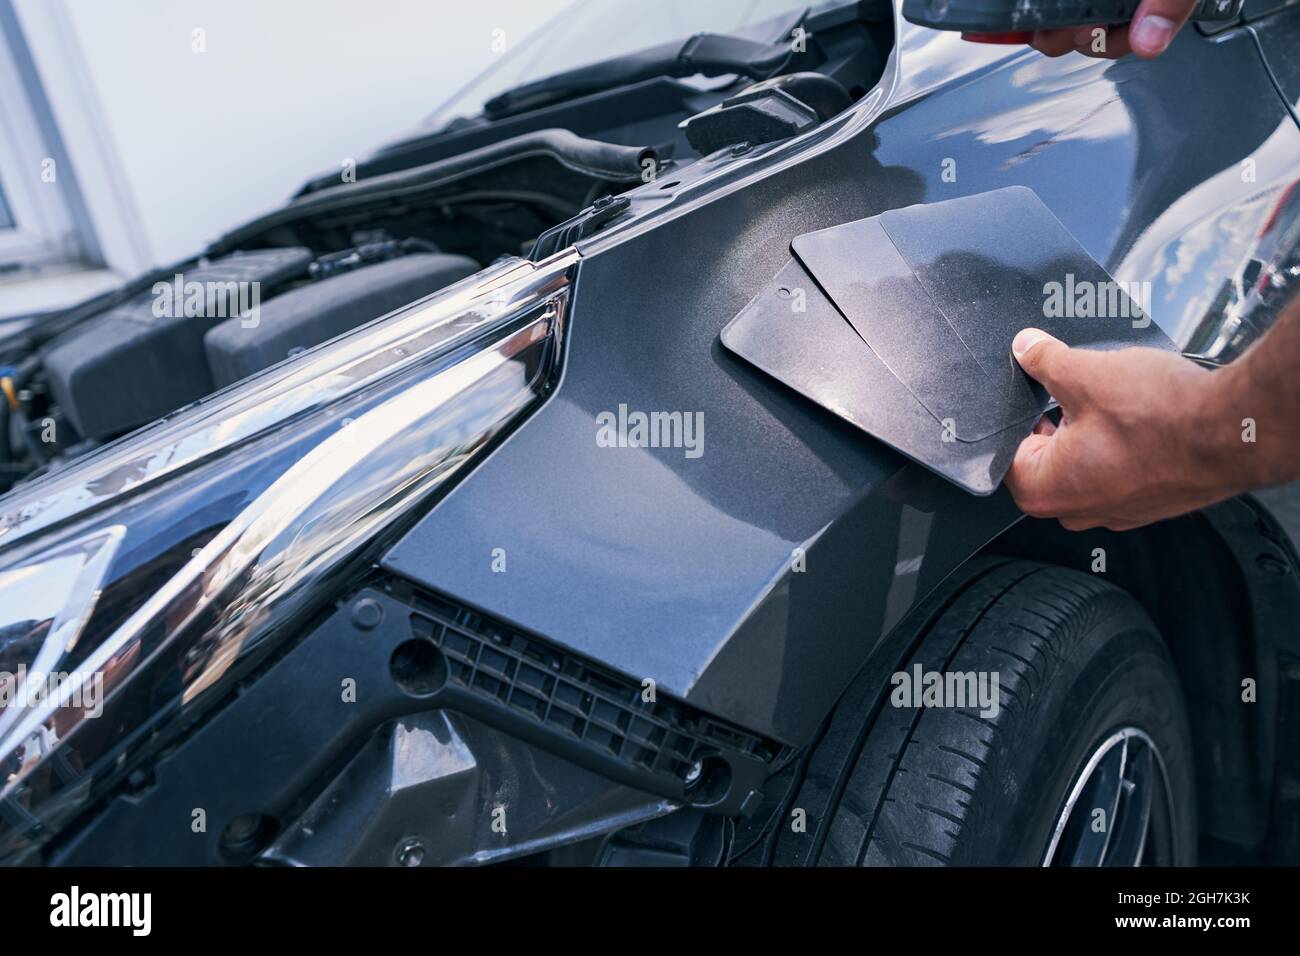 Car workshop employee putting colour samples on automobile surface Stock Photo